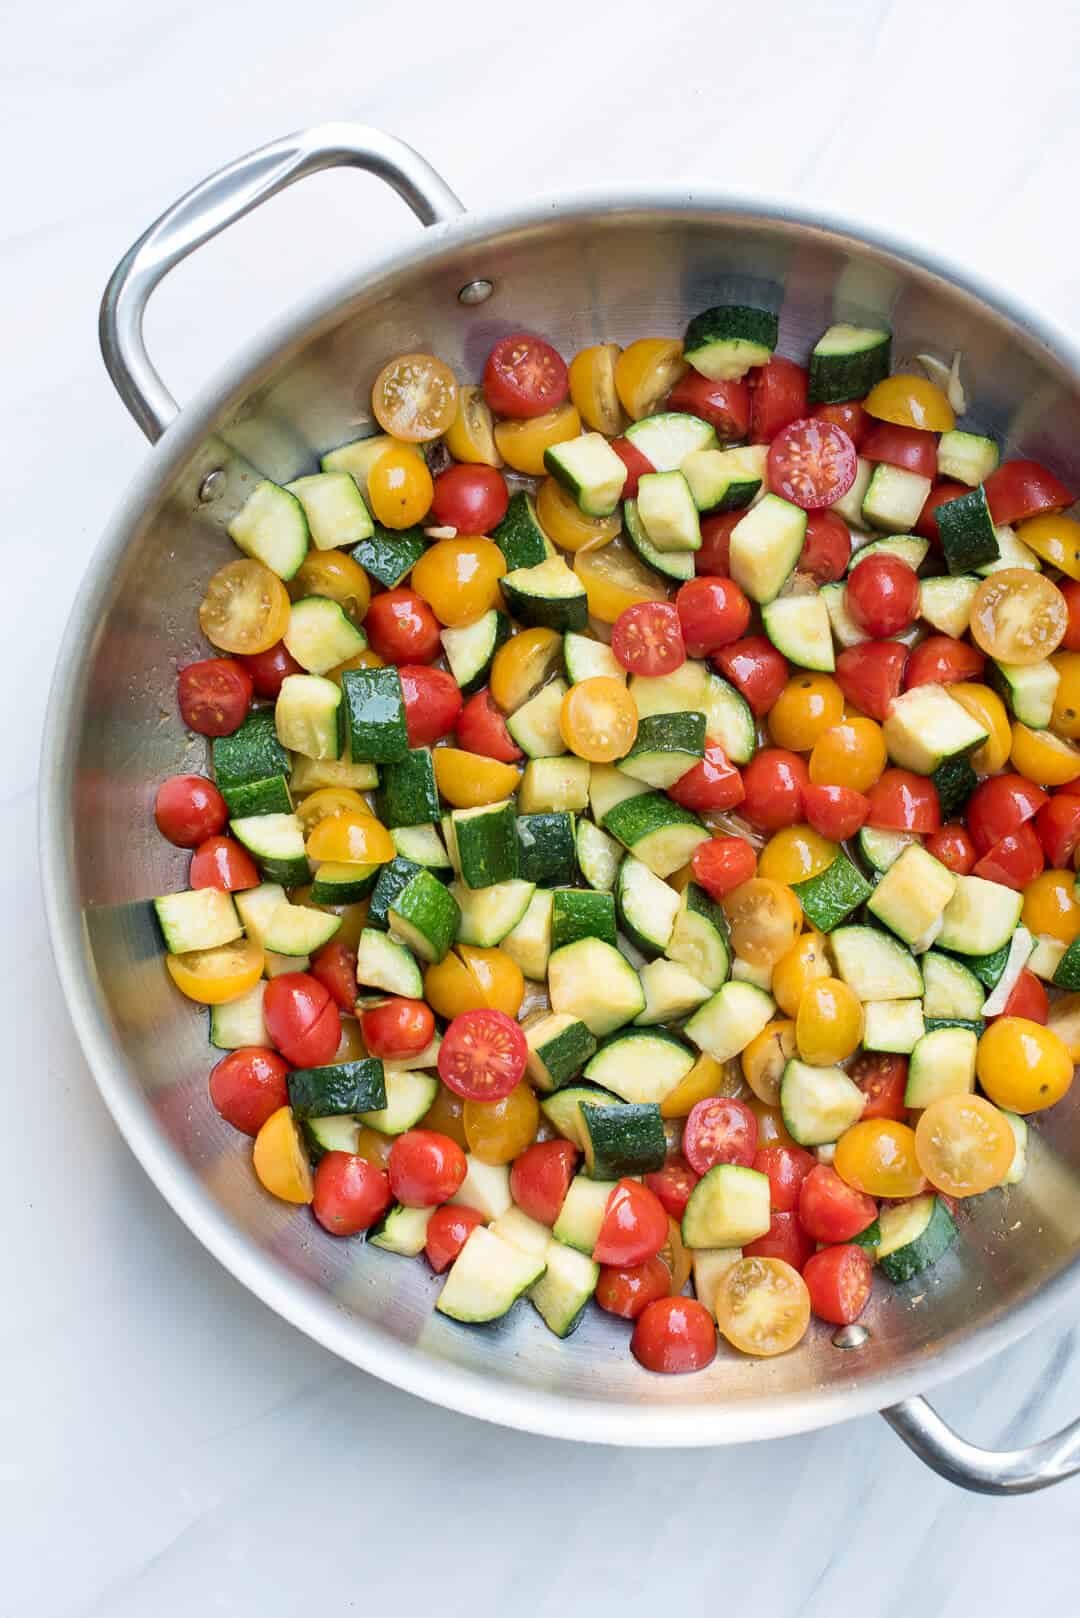 A stainless steel skillet full of chopped zucchini, red and yellow cherry tomatoes, and fresh garlic.